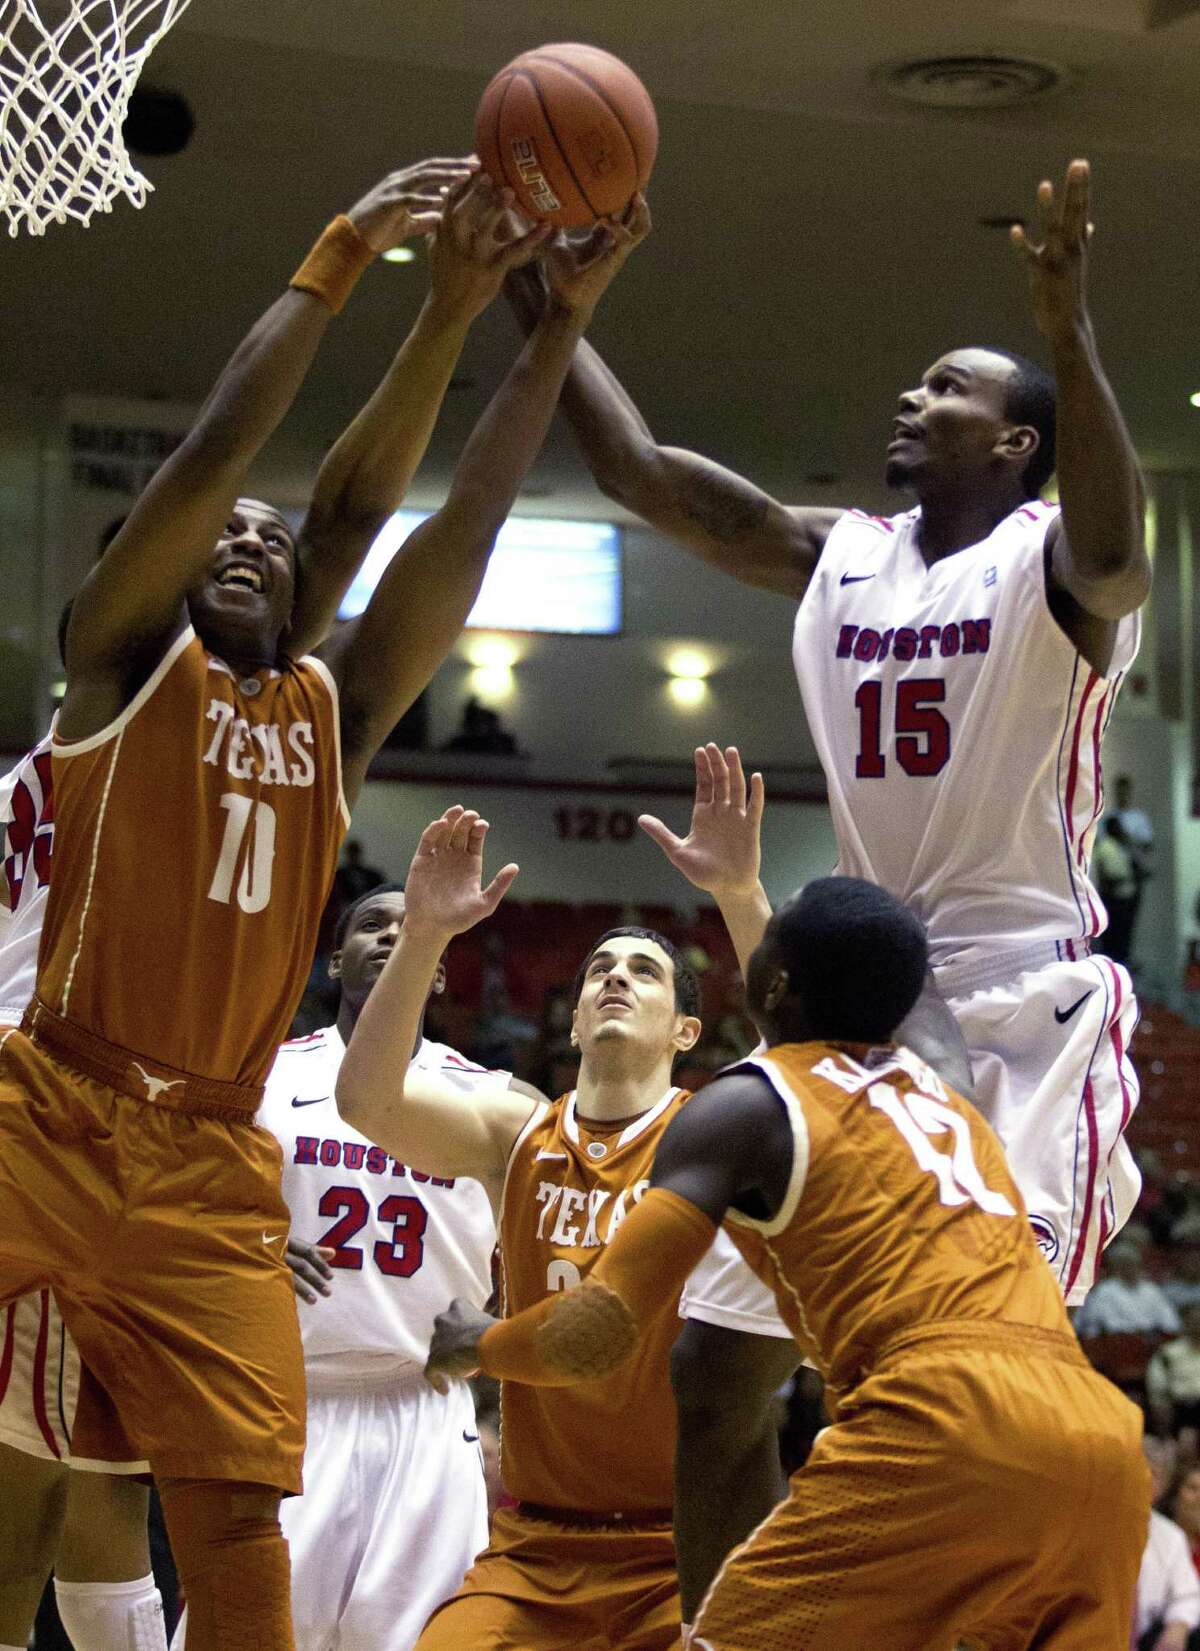 Texas' Jonathan Holmes (left) battles Houston's Leon Gibson (right) and others for a rebound Wednesday night. The Longhorns were knocked out of the CBI with the loss to the Cougars.